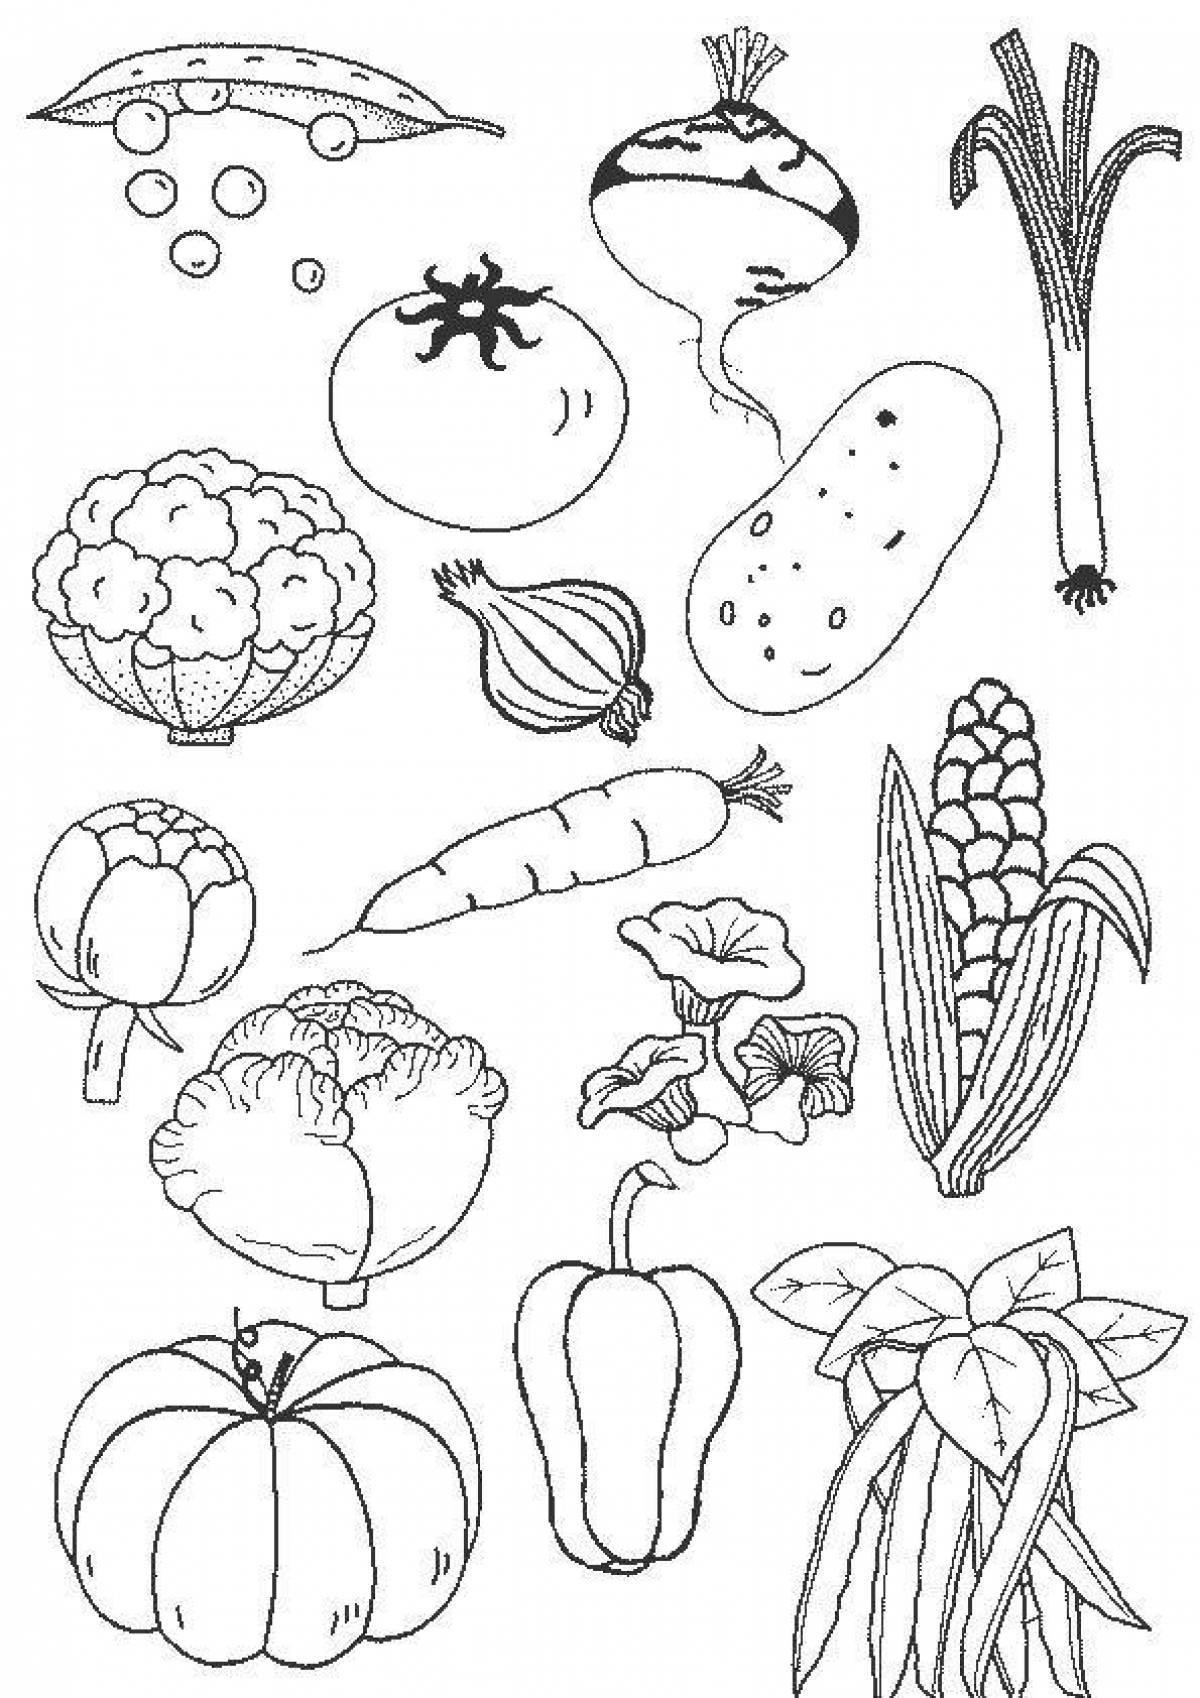 Great vegetable coloring book for kids 6-7 years old